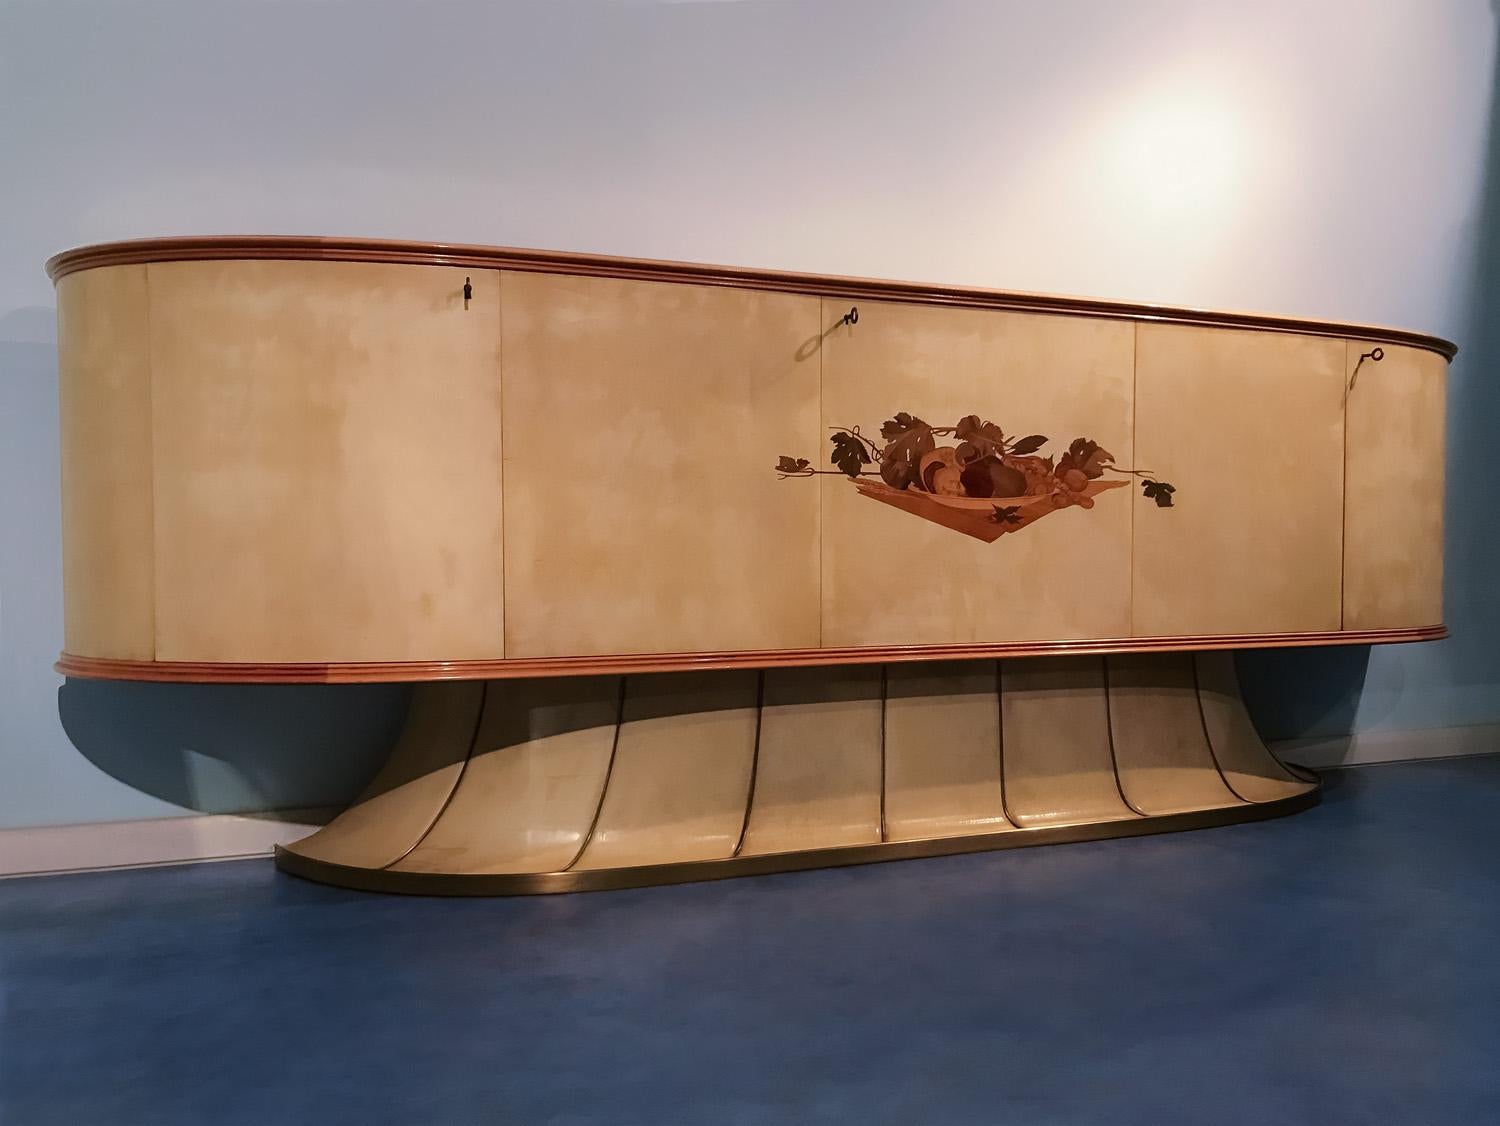 Stunning and very rare Sideboard designed by Vittorio Dassi between the 1940s and 1950s, characterized by a demilune shape case having top and doors covered in parchment, with the central panels finished with a superb inlay decoration of a